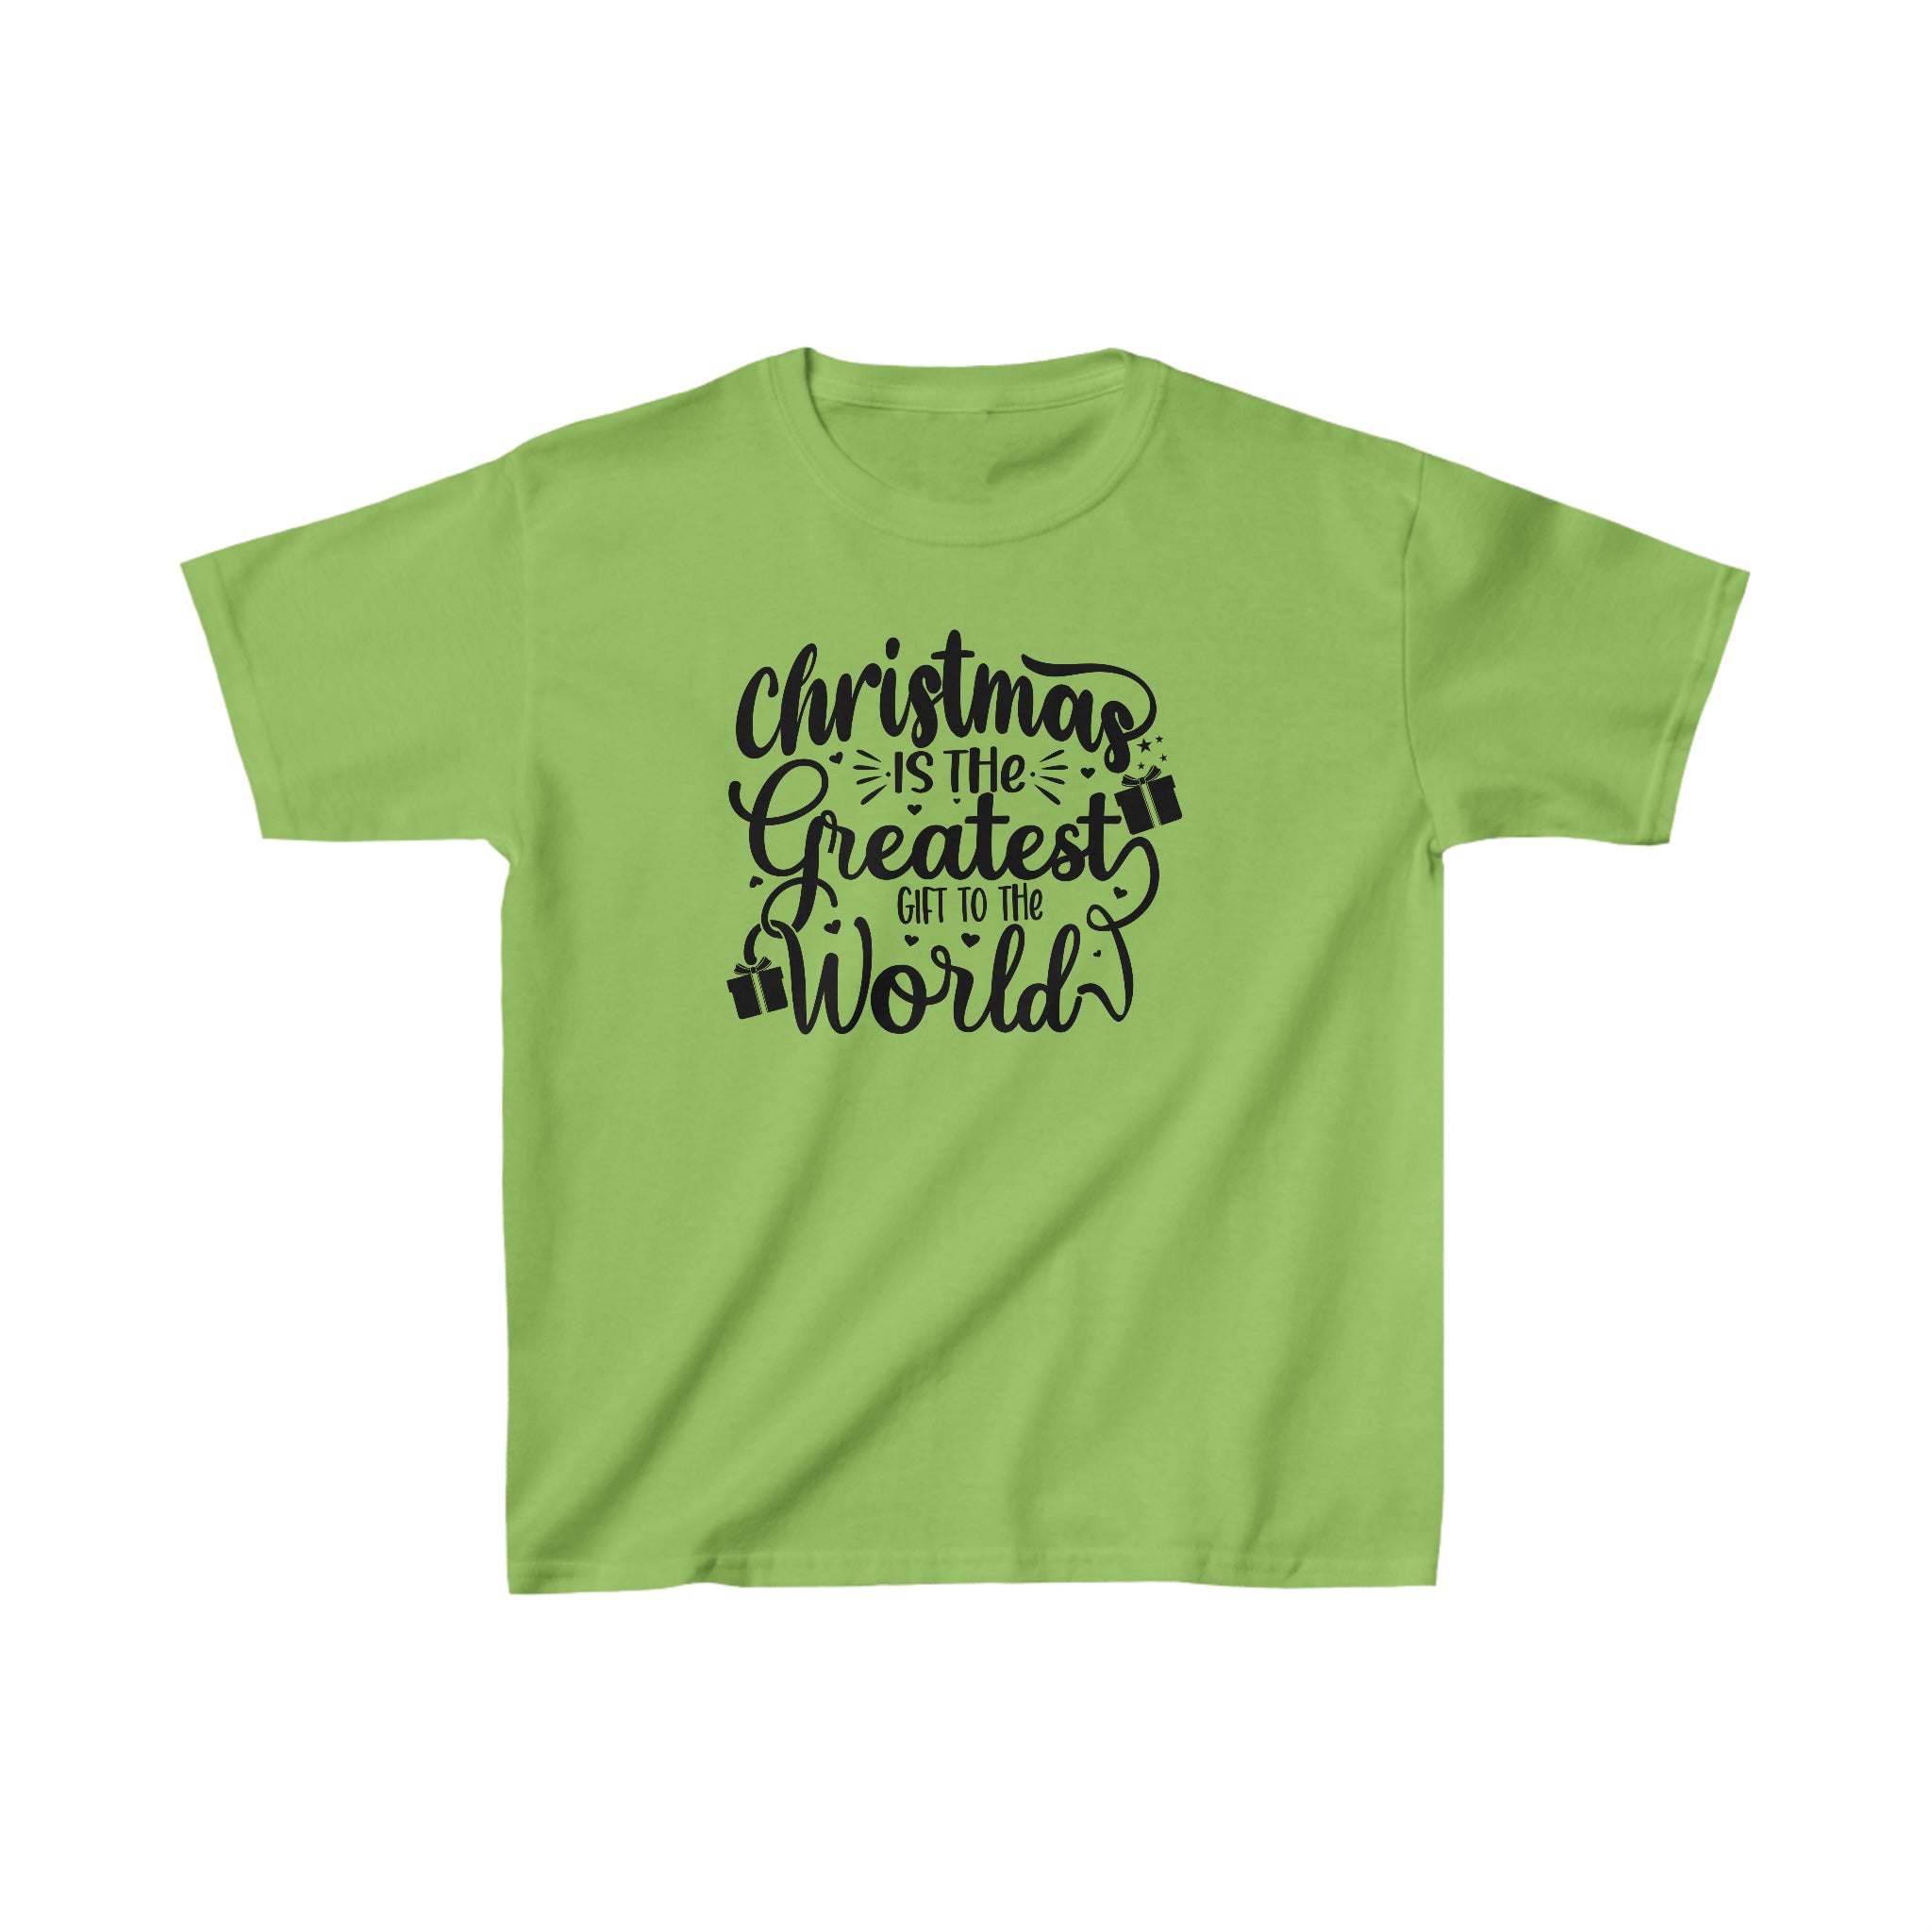 The greatest gift to the world Kids Christmas Tee, Kids Christmas T-shirt, Merry Christmas Kids T-shirt, Unisex Kids T-shirts, Unisex jersey short sleeve kids tee